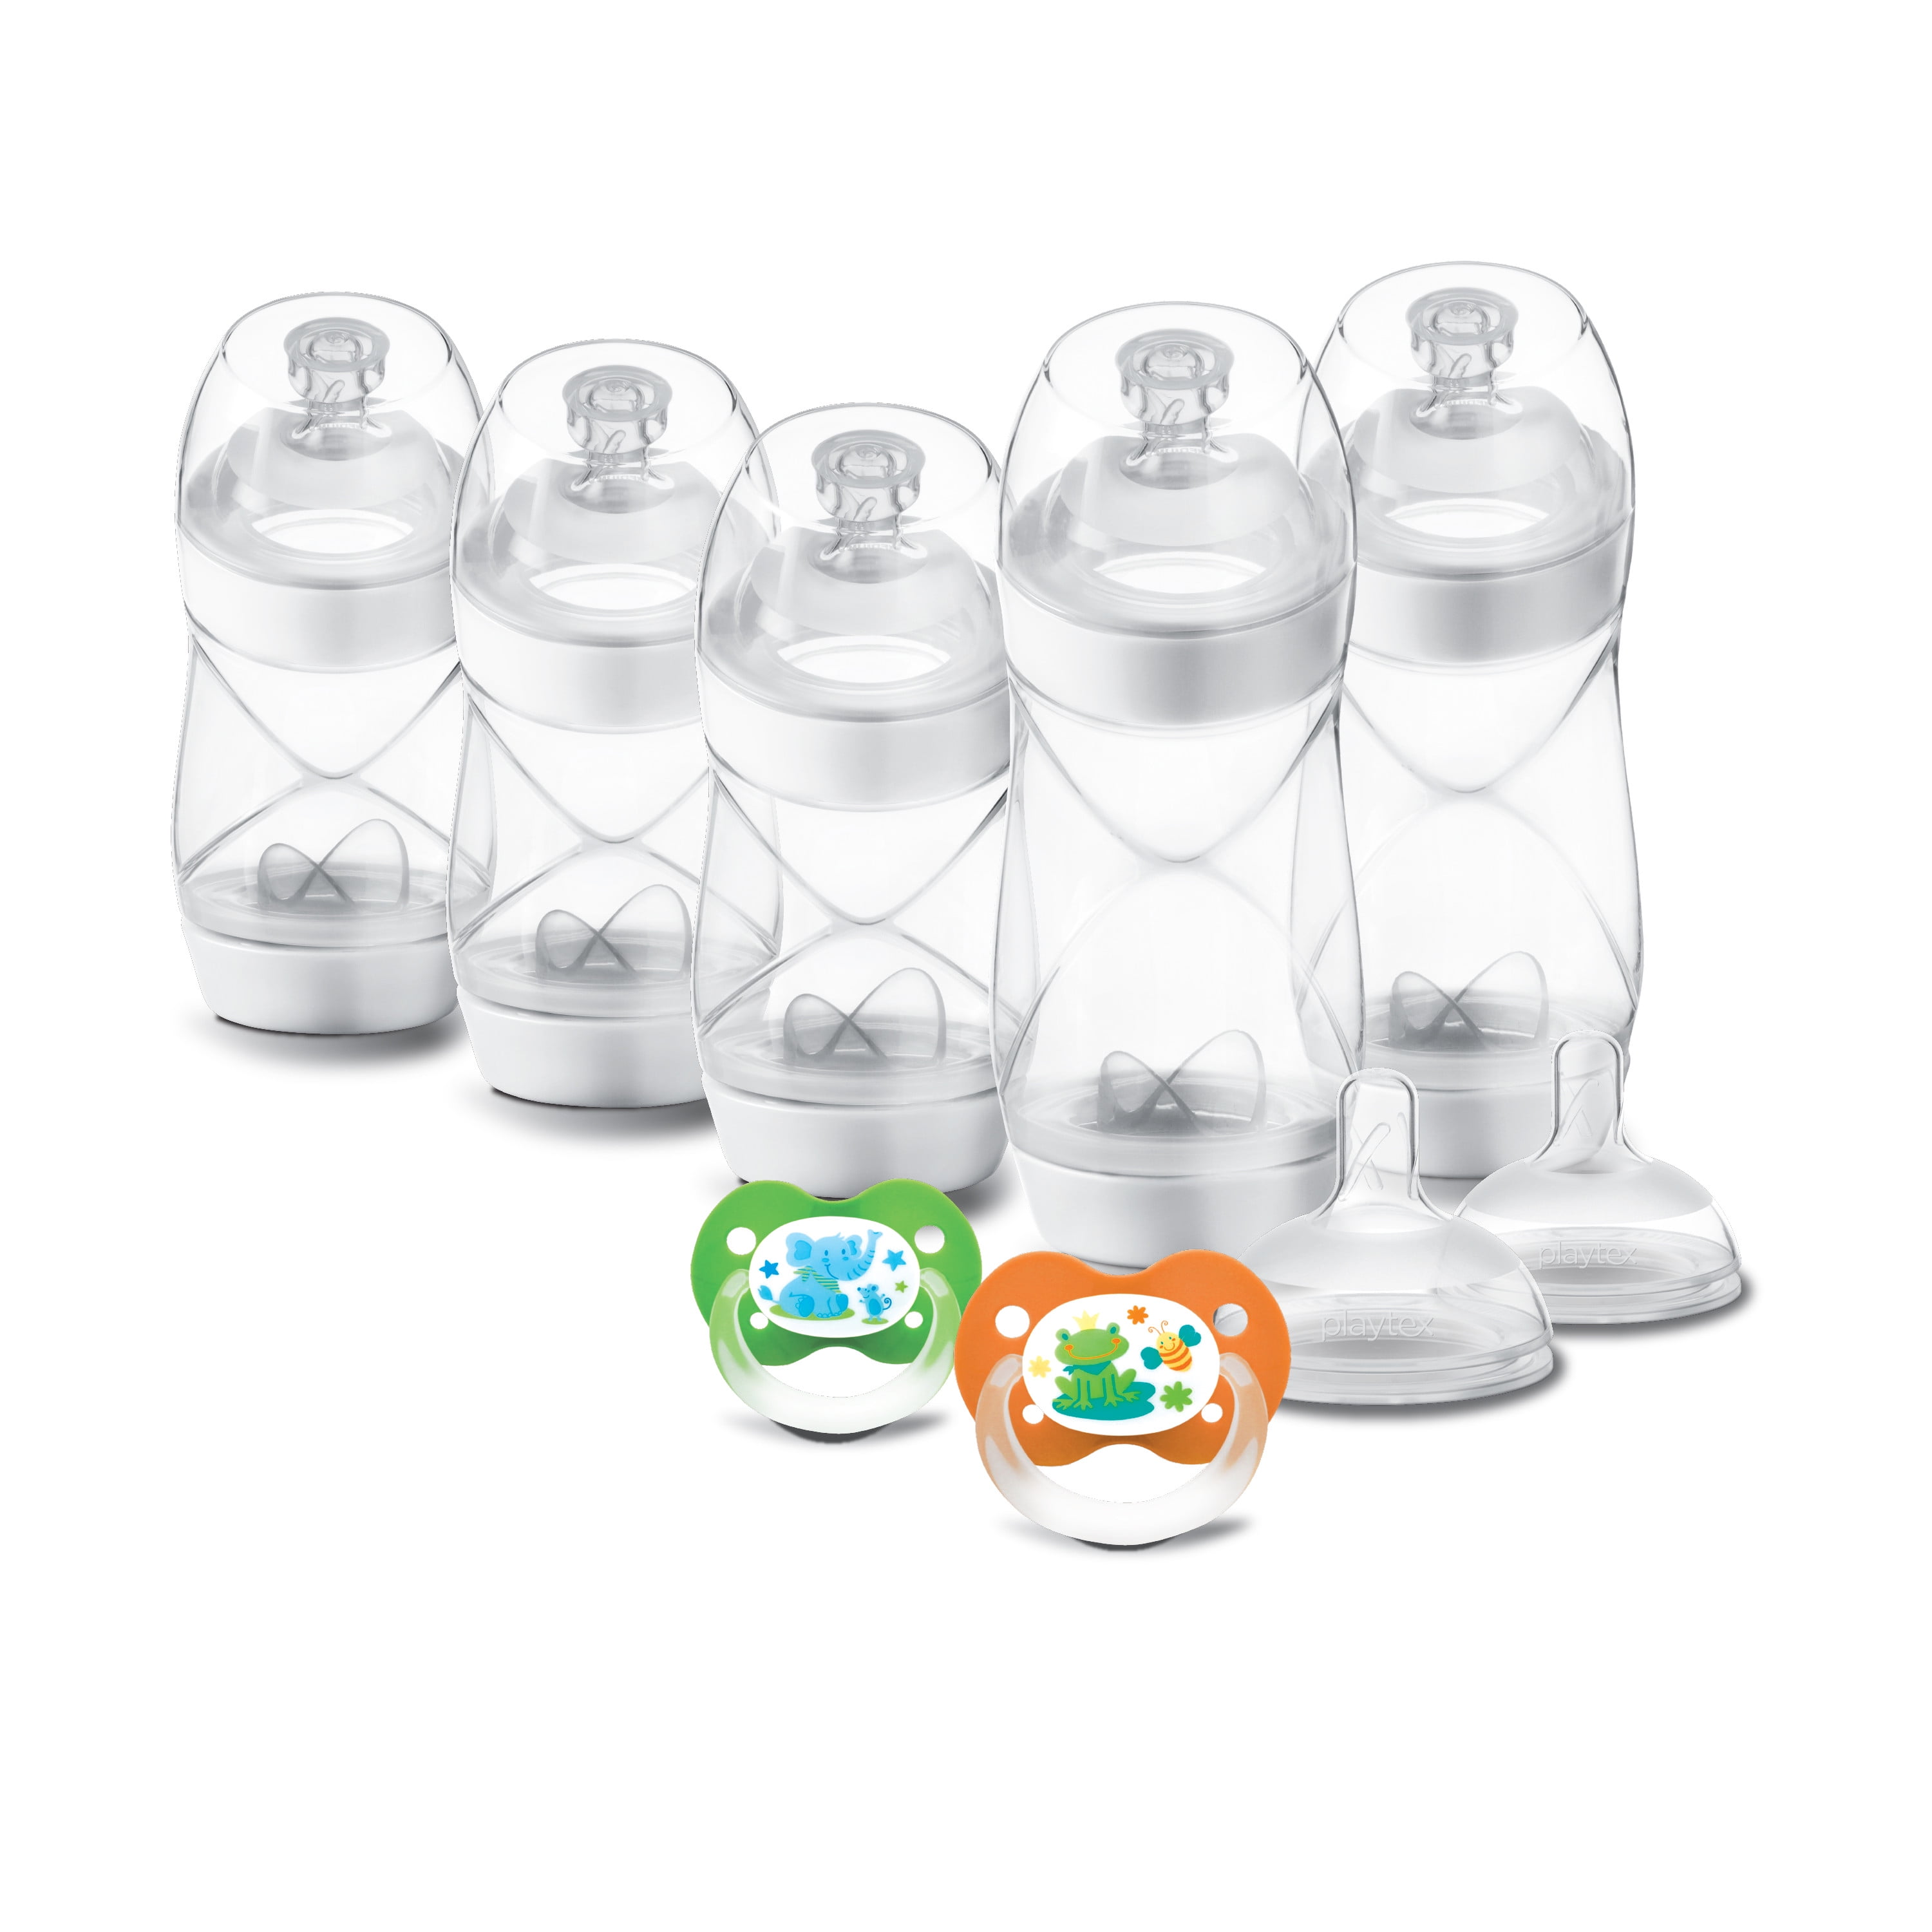 Playtex Baby VentAire Complete Tummy Comfort Baby Bottles, 6 oz, 3